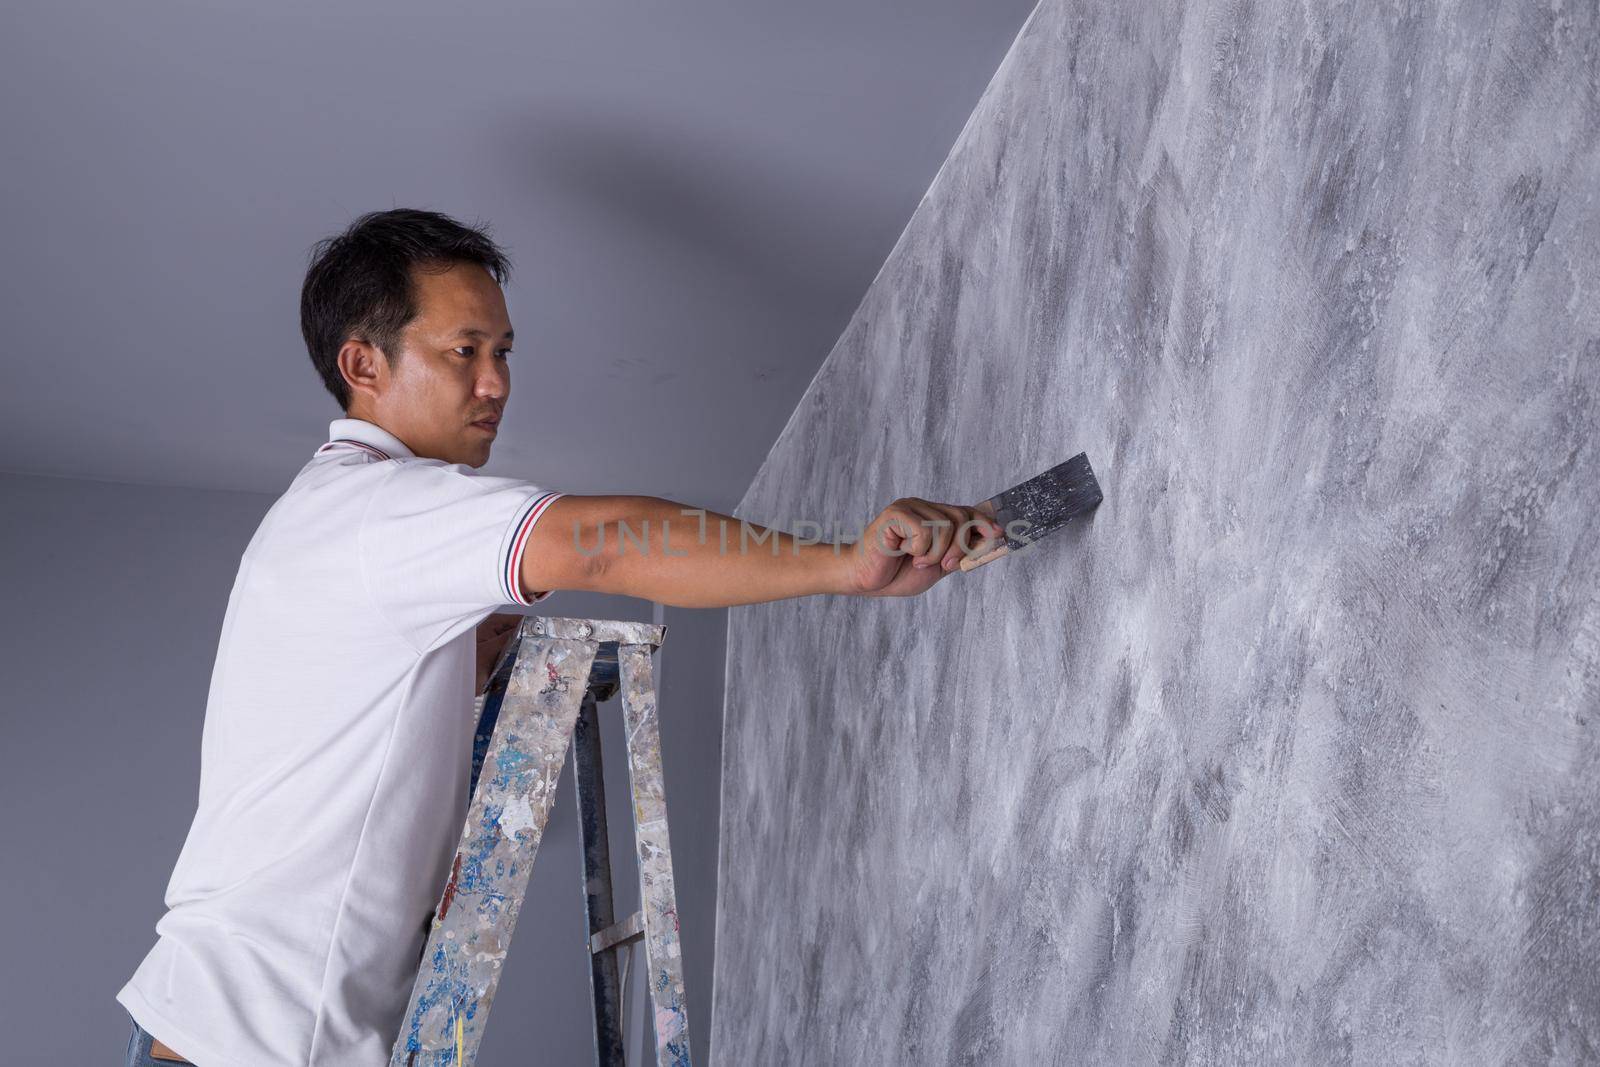 worker use brush for color paint concrete Loft style on wall of house